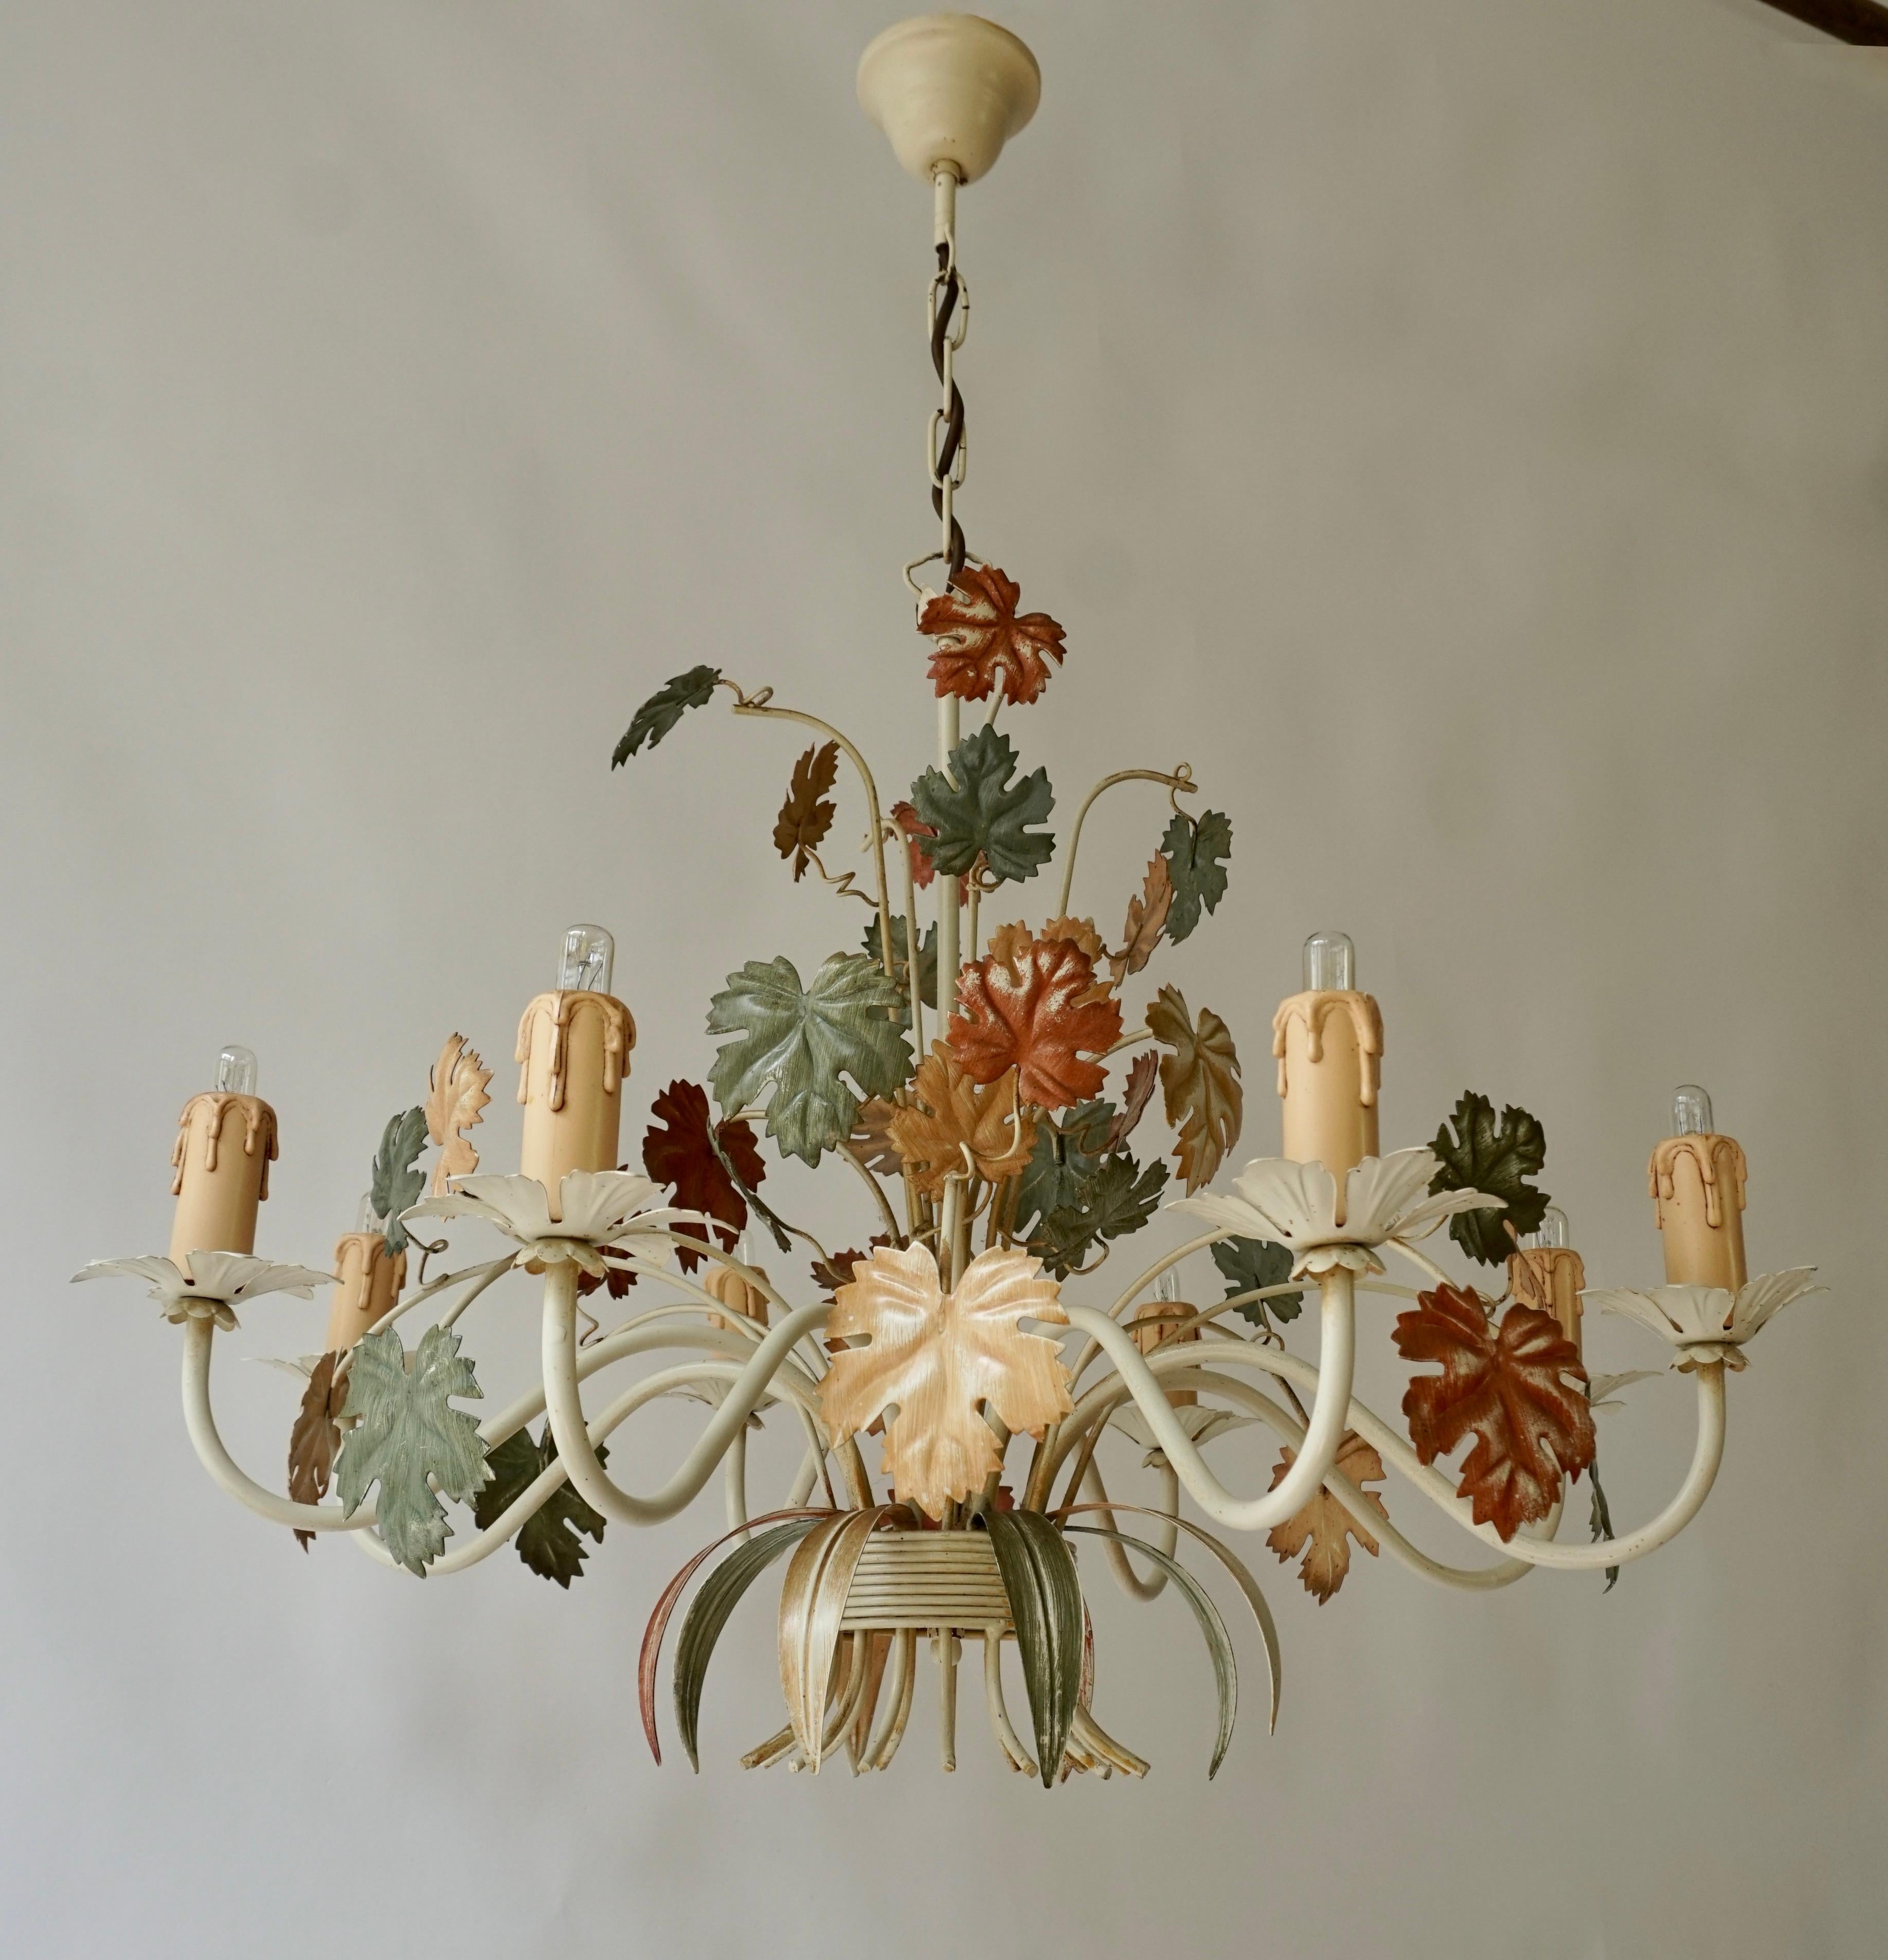 Painted Three Vintage Italian Tole Floral Chandeliers With Leaves For Sale